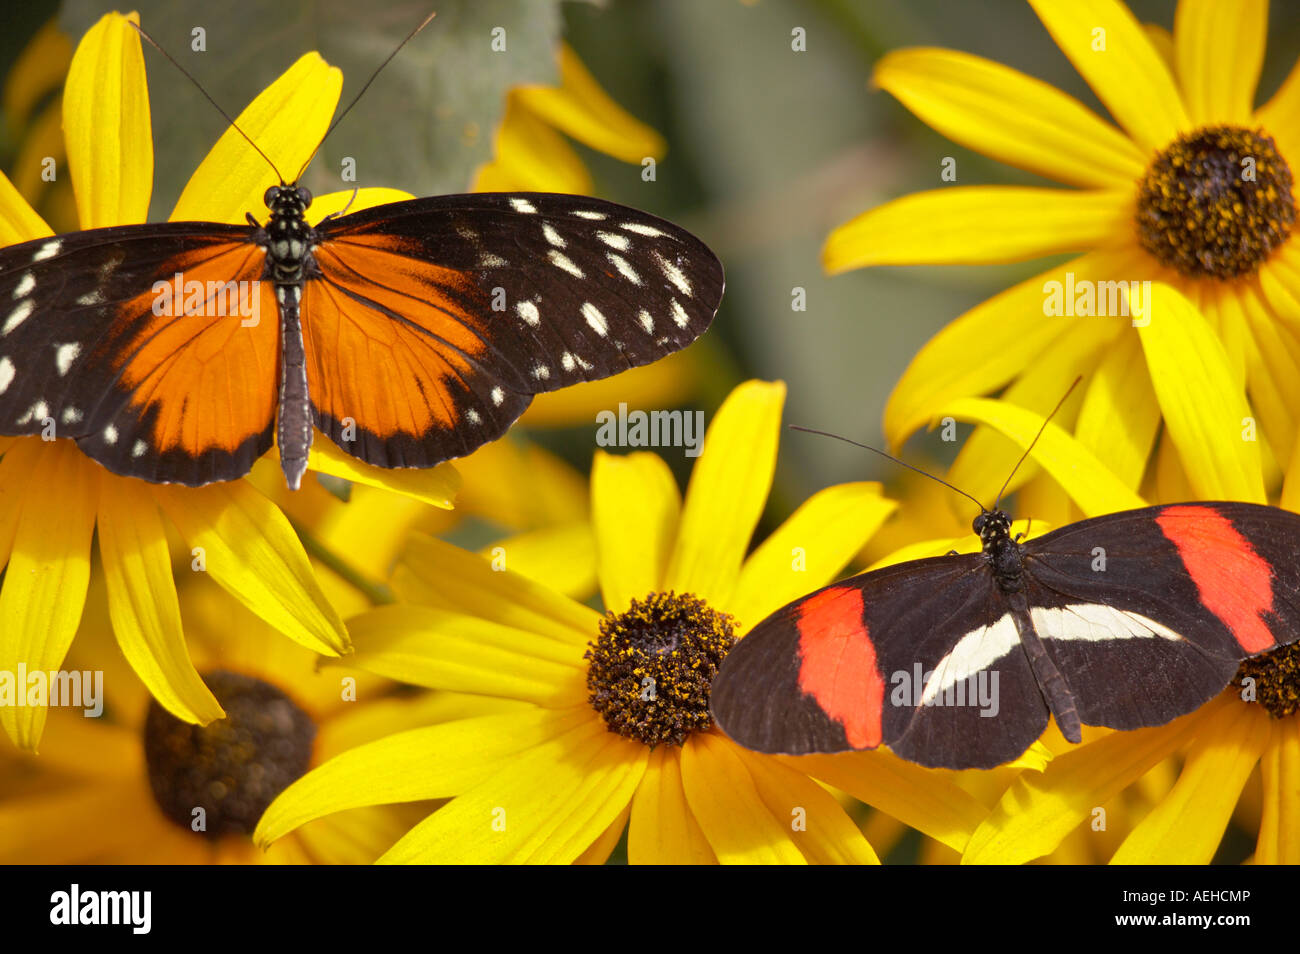 Golden helicon Heliconius hecale and Postman butterfly Heliconius erato on Black Eyed Susan flower Portland Oregon Zoo Stock Photo